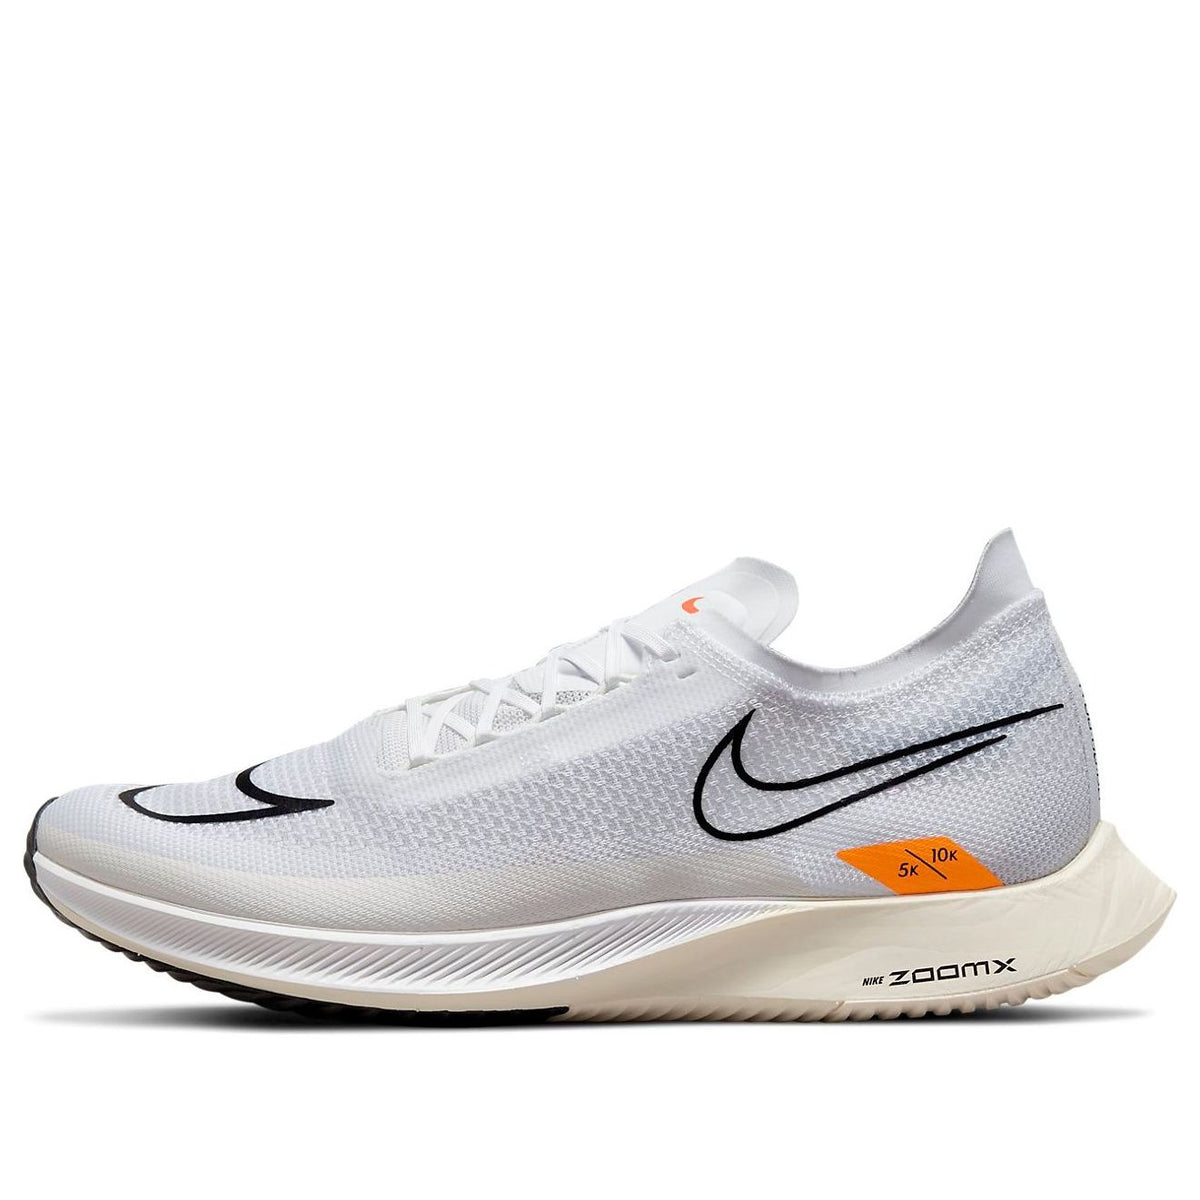 Nike ZoomX Streakfly 'White Photon Dust' DH9275-100